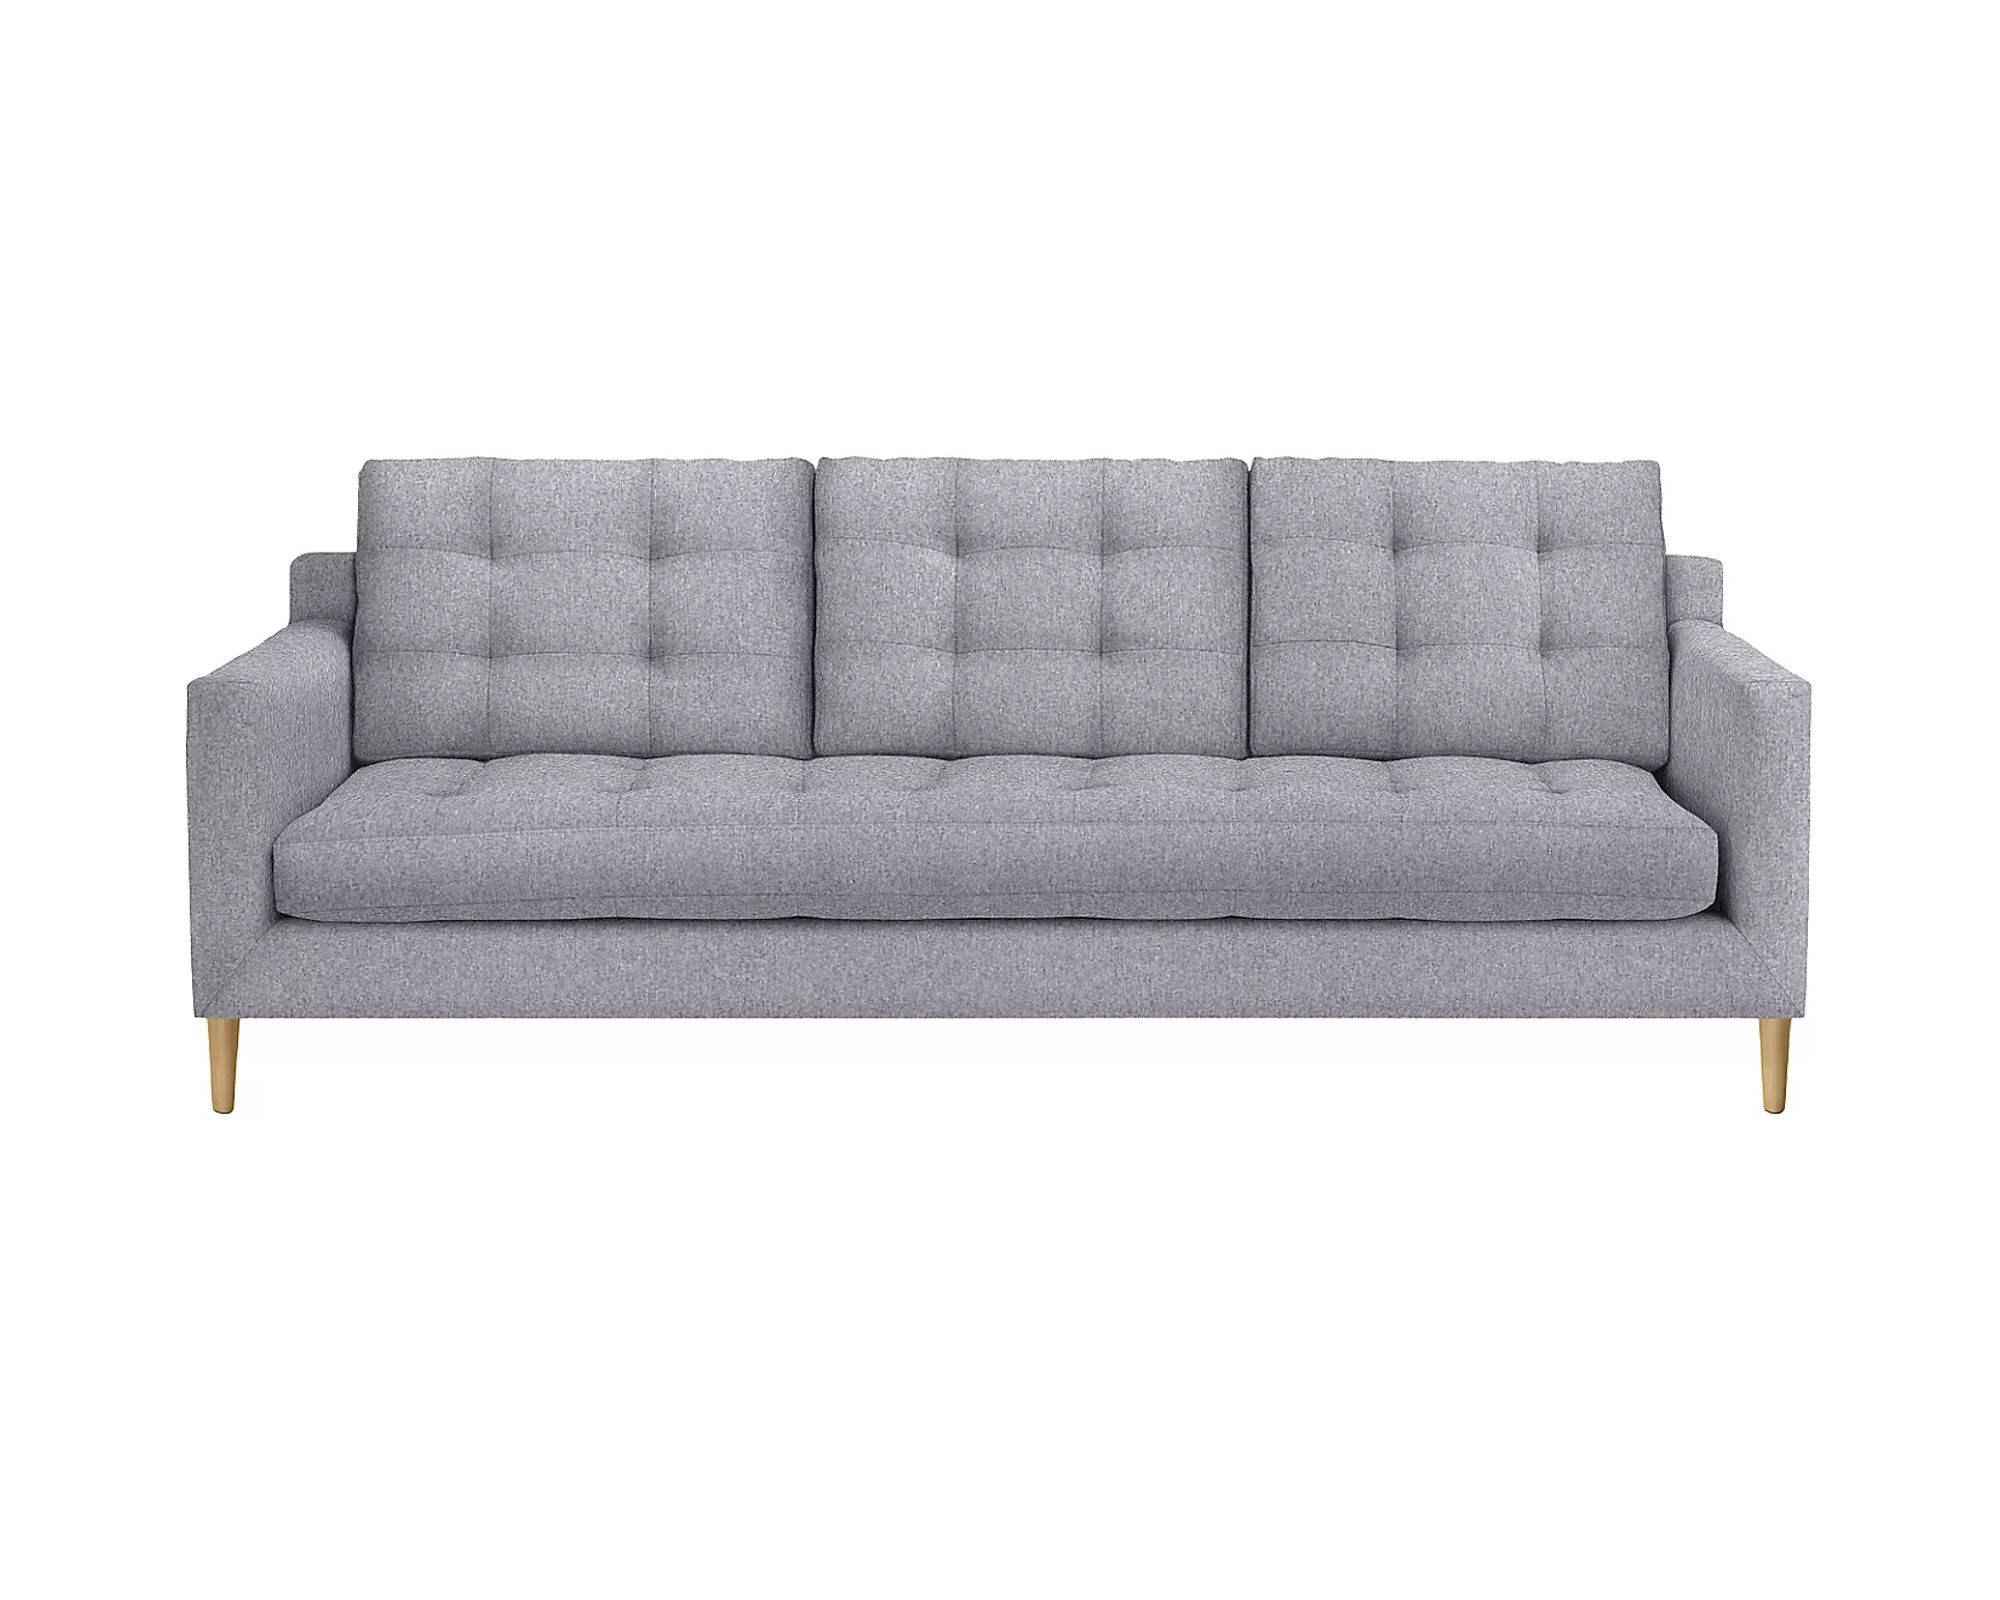 A grey high back sofa with wooden legs